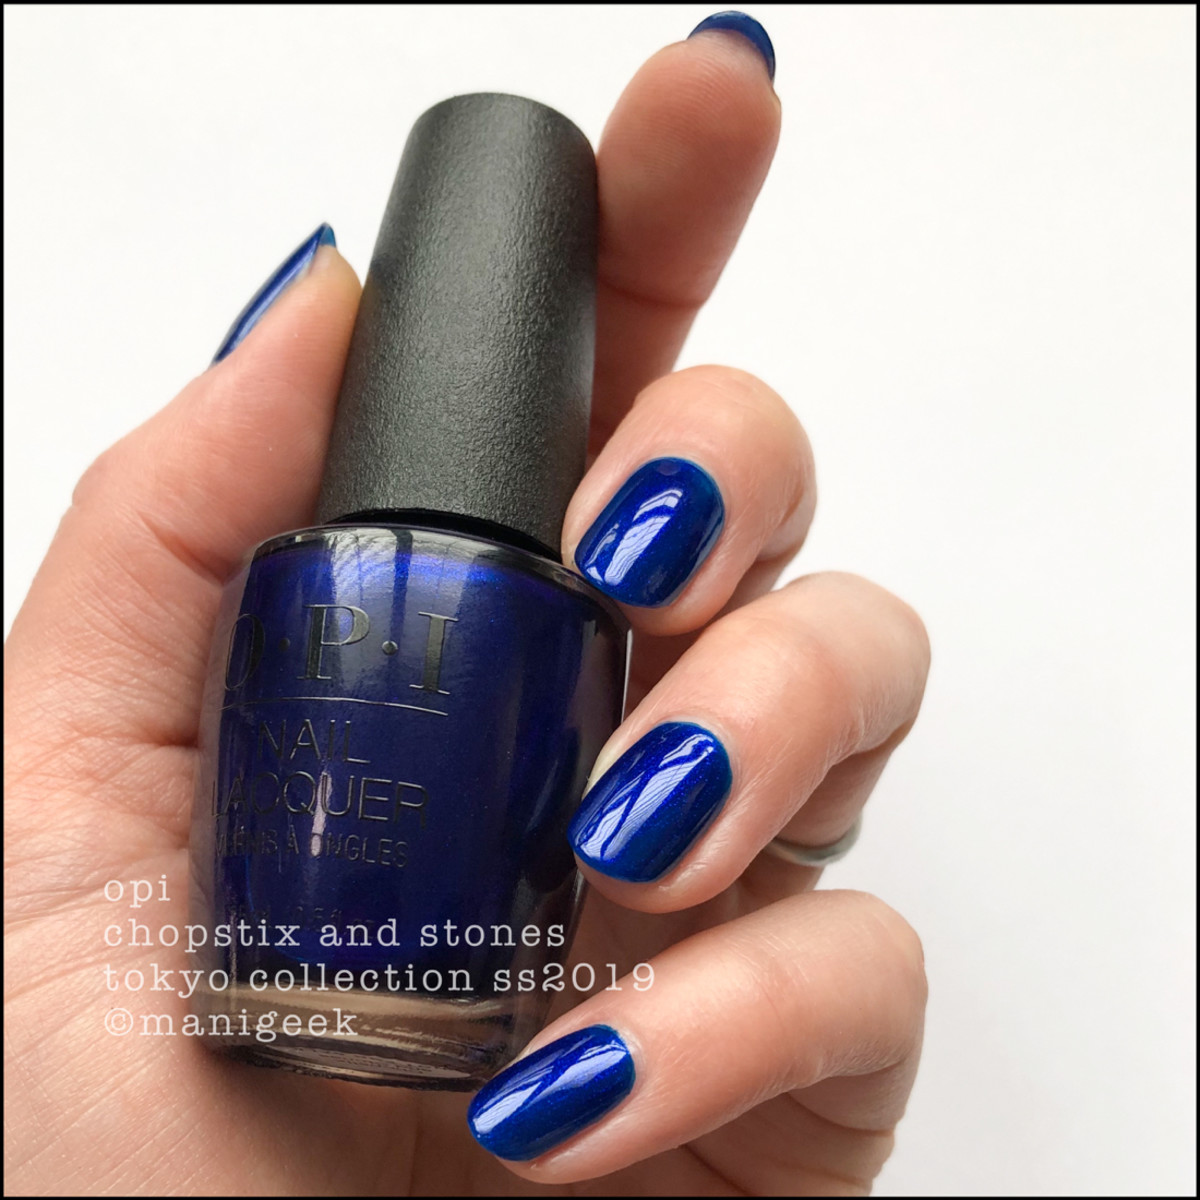 OPI Chopstix and Stones - OPI Tokyo Swatches 2019